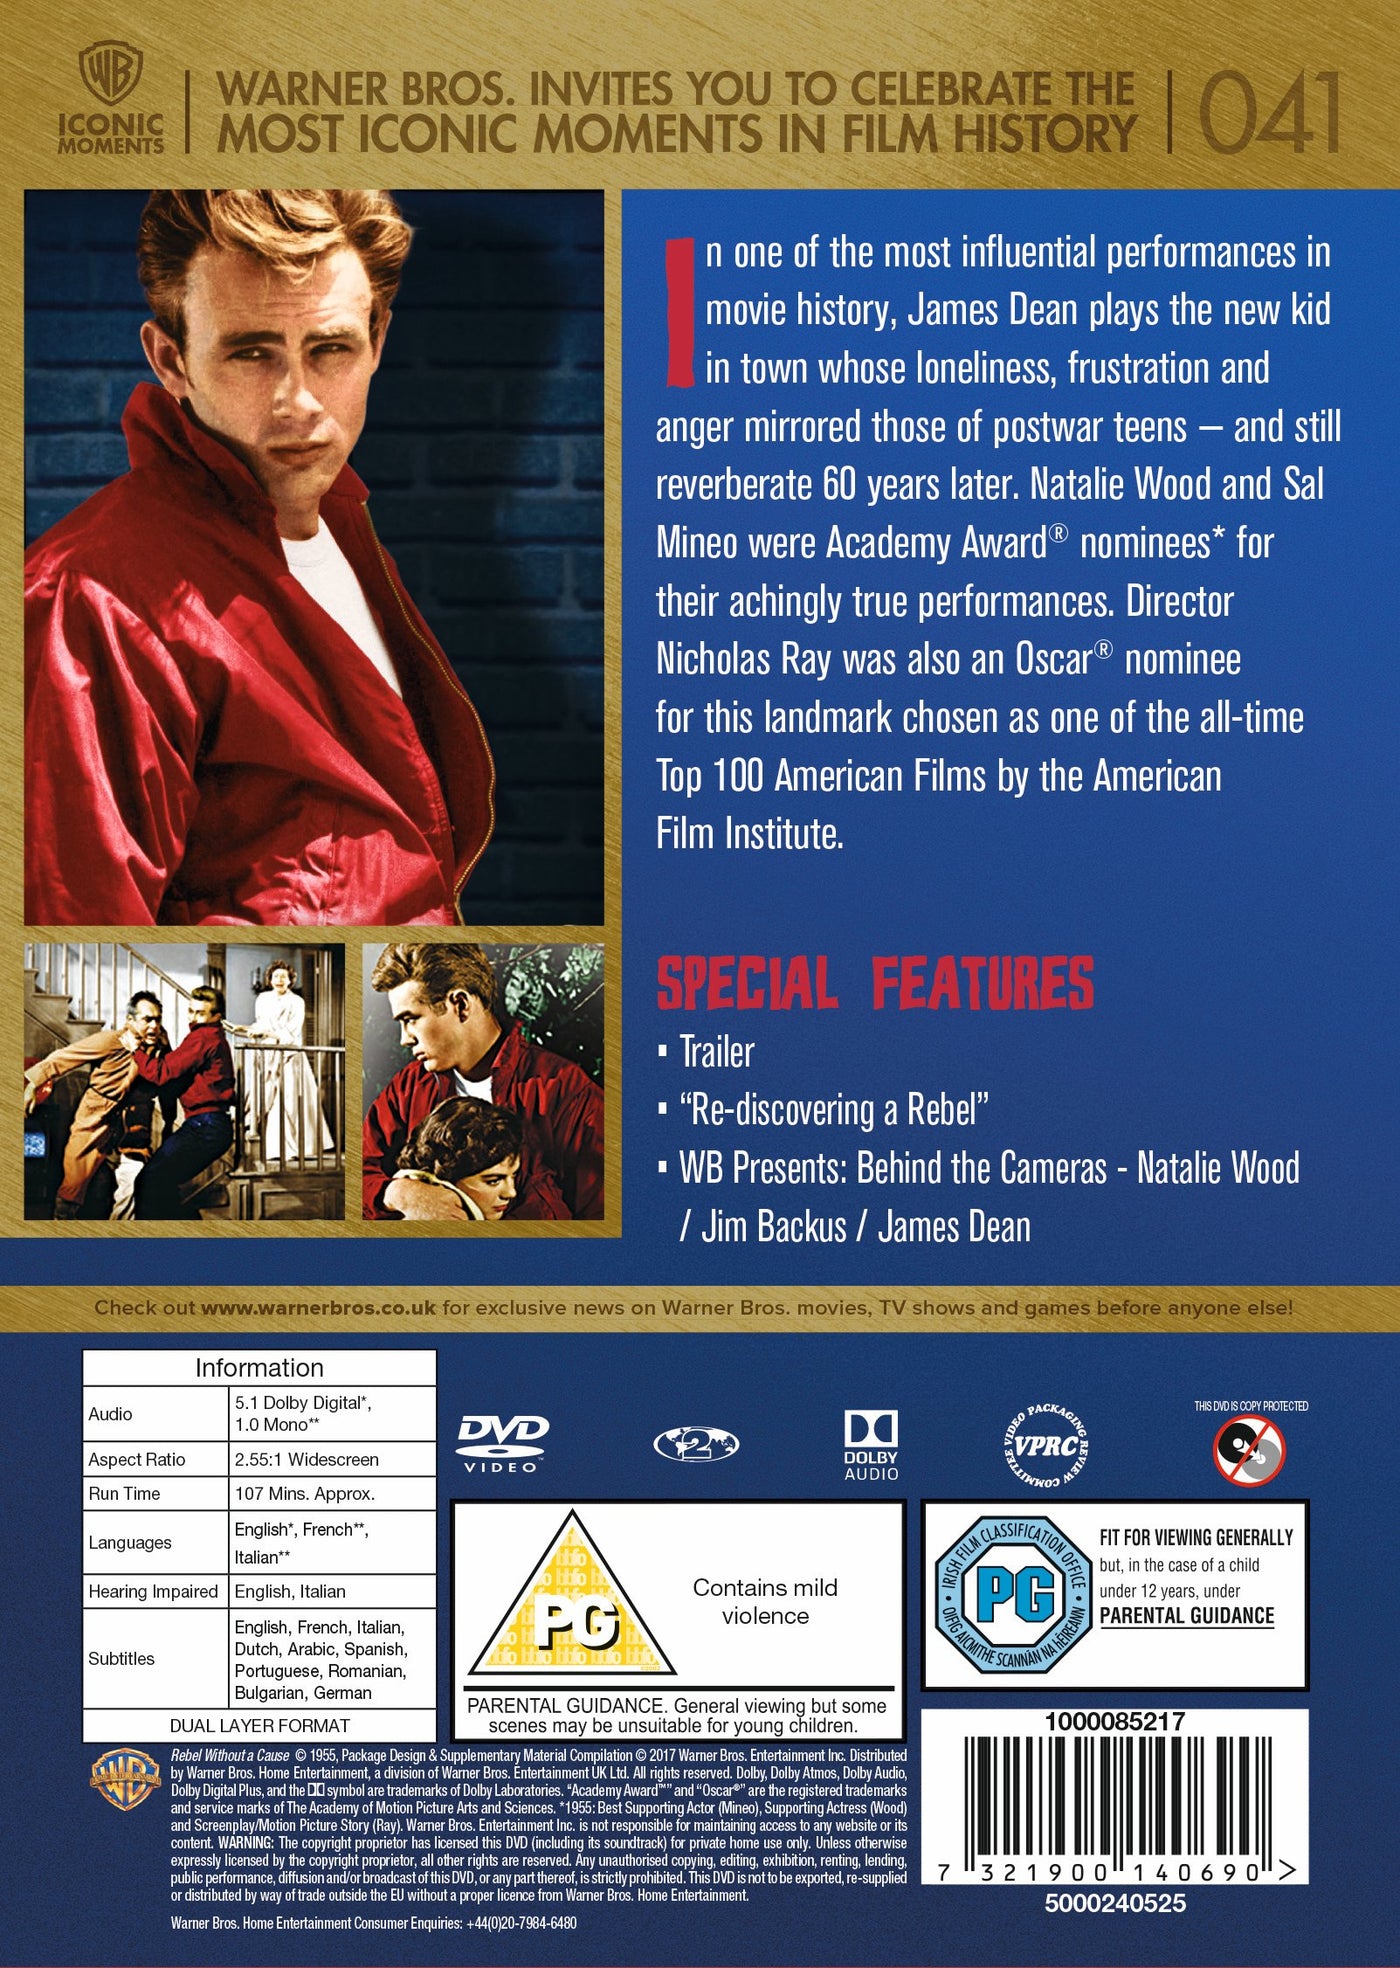 Rebel Without A Cause [1955] (DVD)